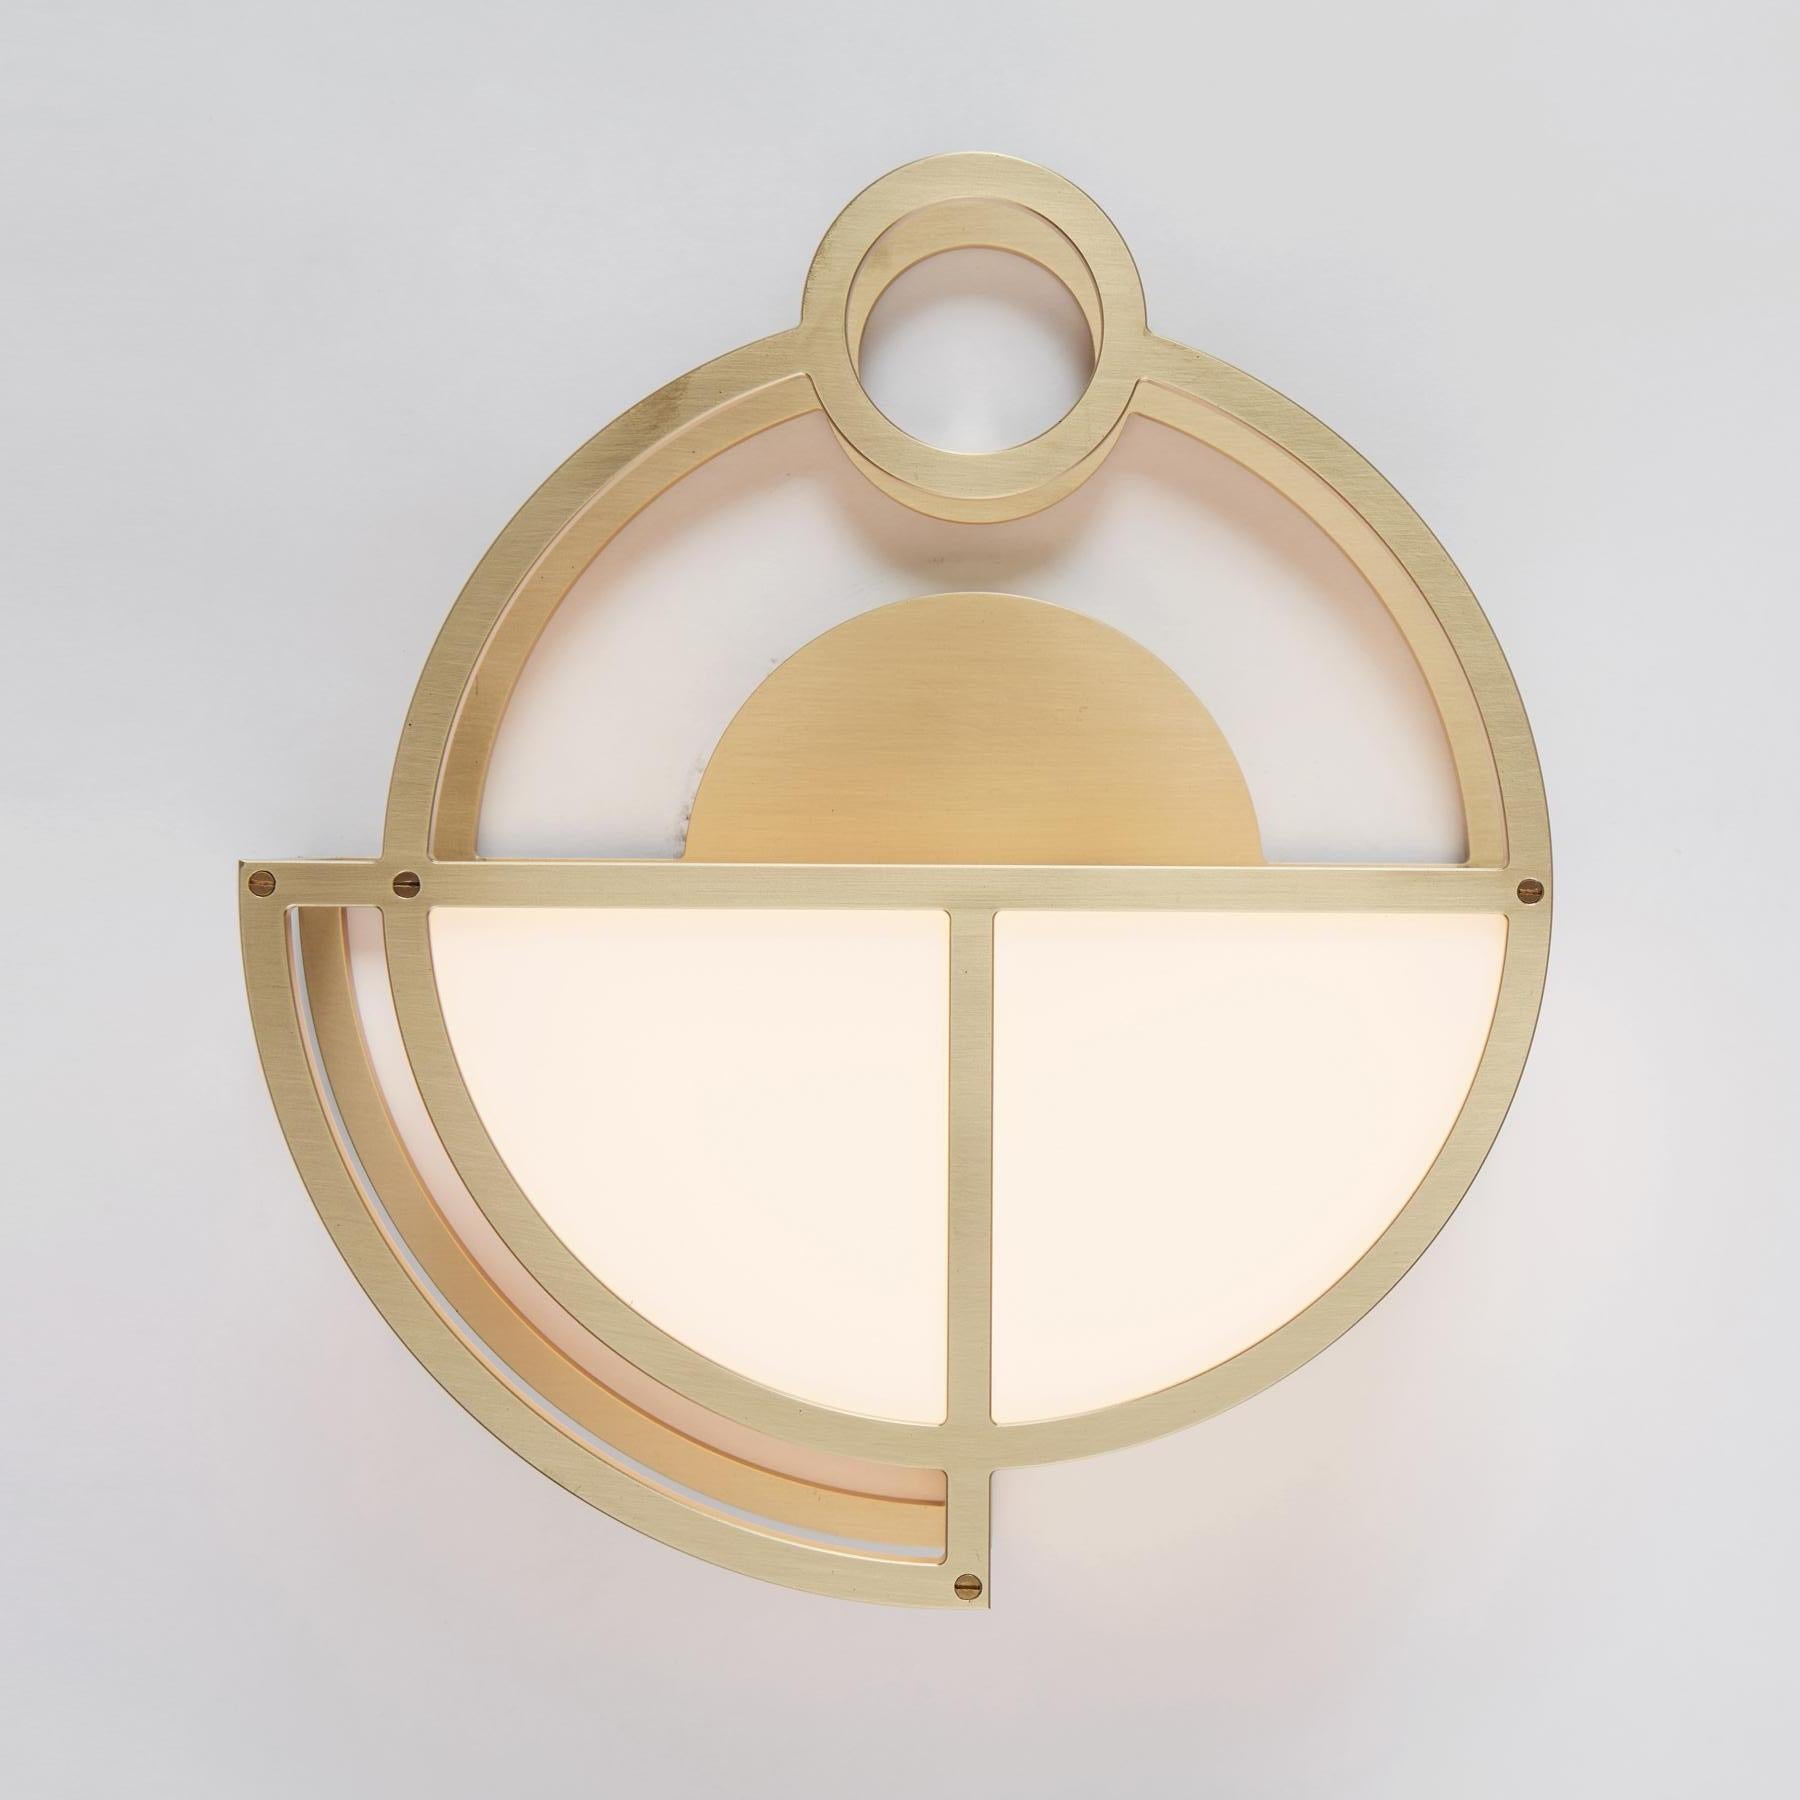 Moonrise lighting collection has been designed by Lara Bohinc for Brooklyn based design and manufacturing company Roll & Hill.

Moonrise collection of lighting is inspired by the lunar phases, with round and half round shapes composed in playful